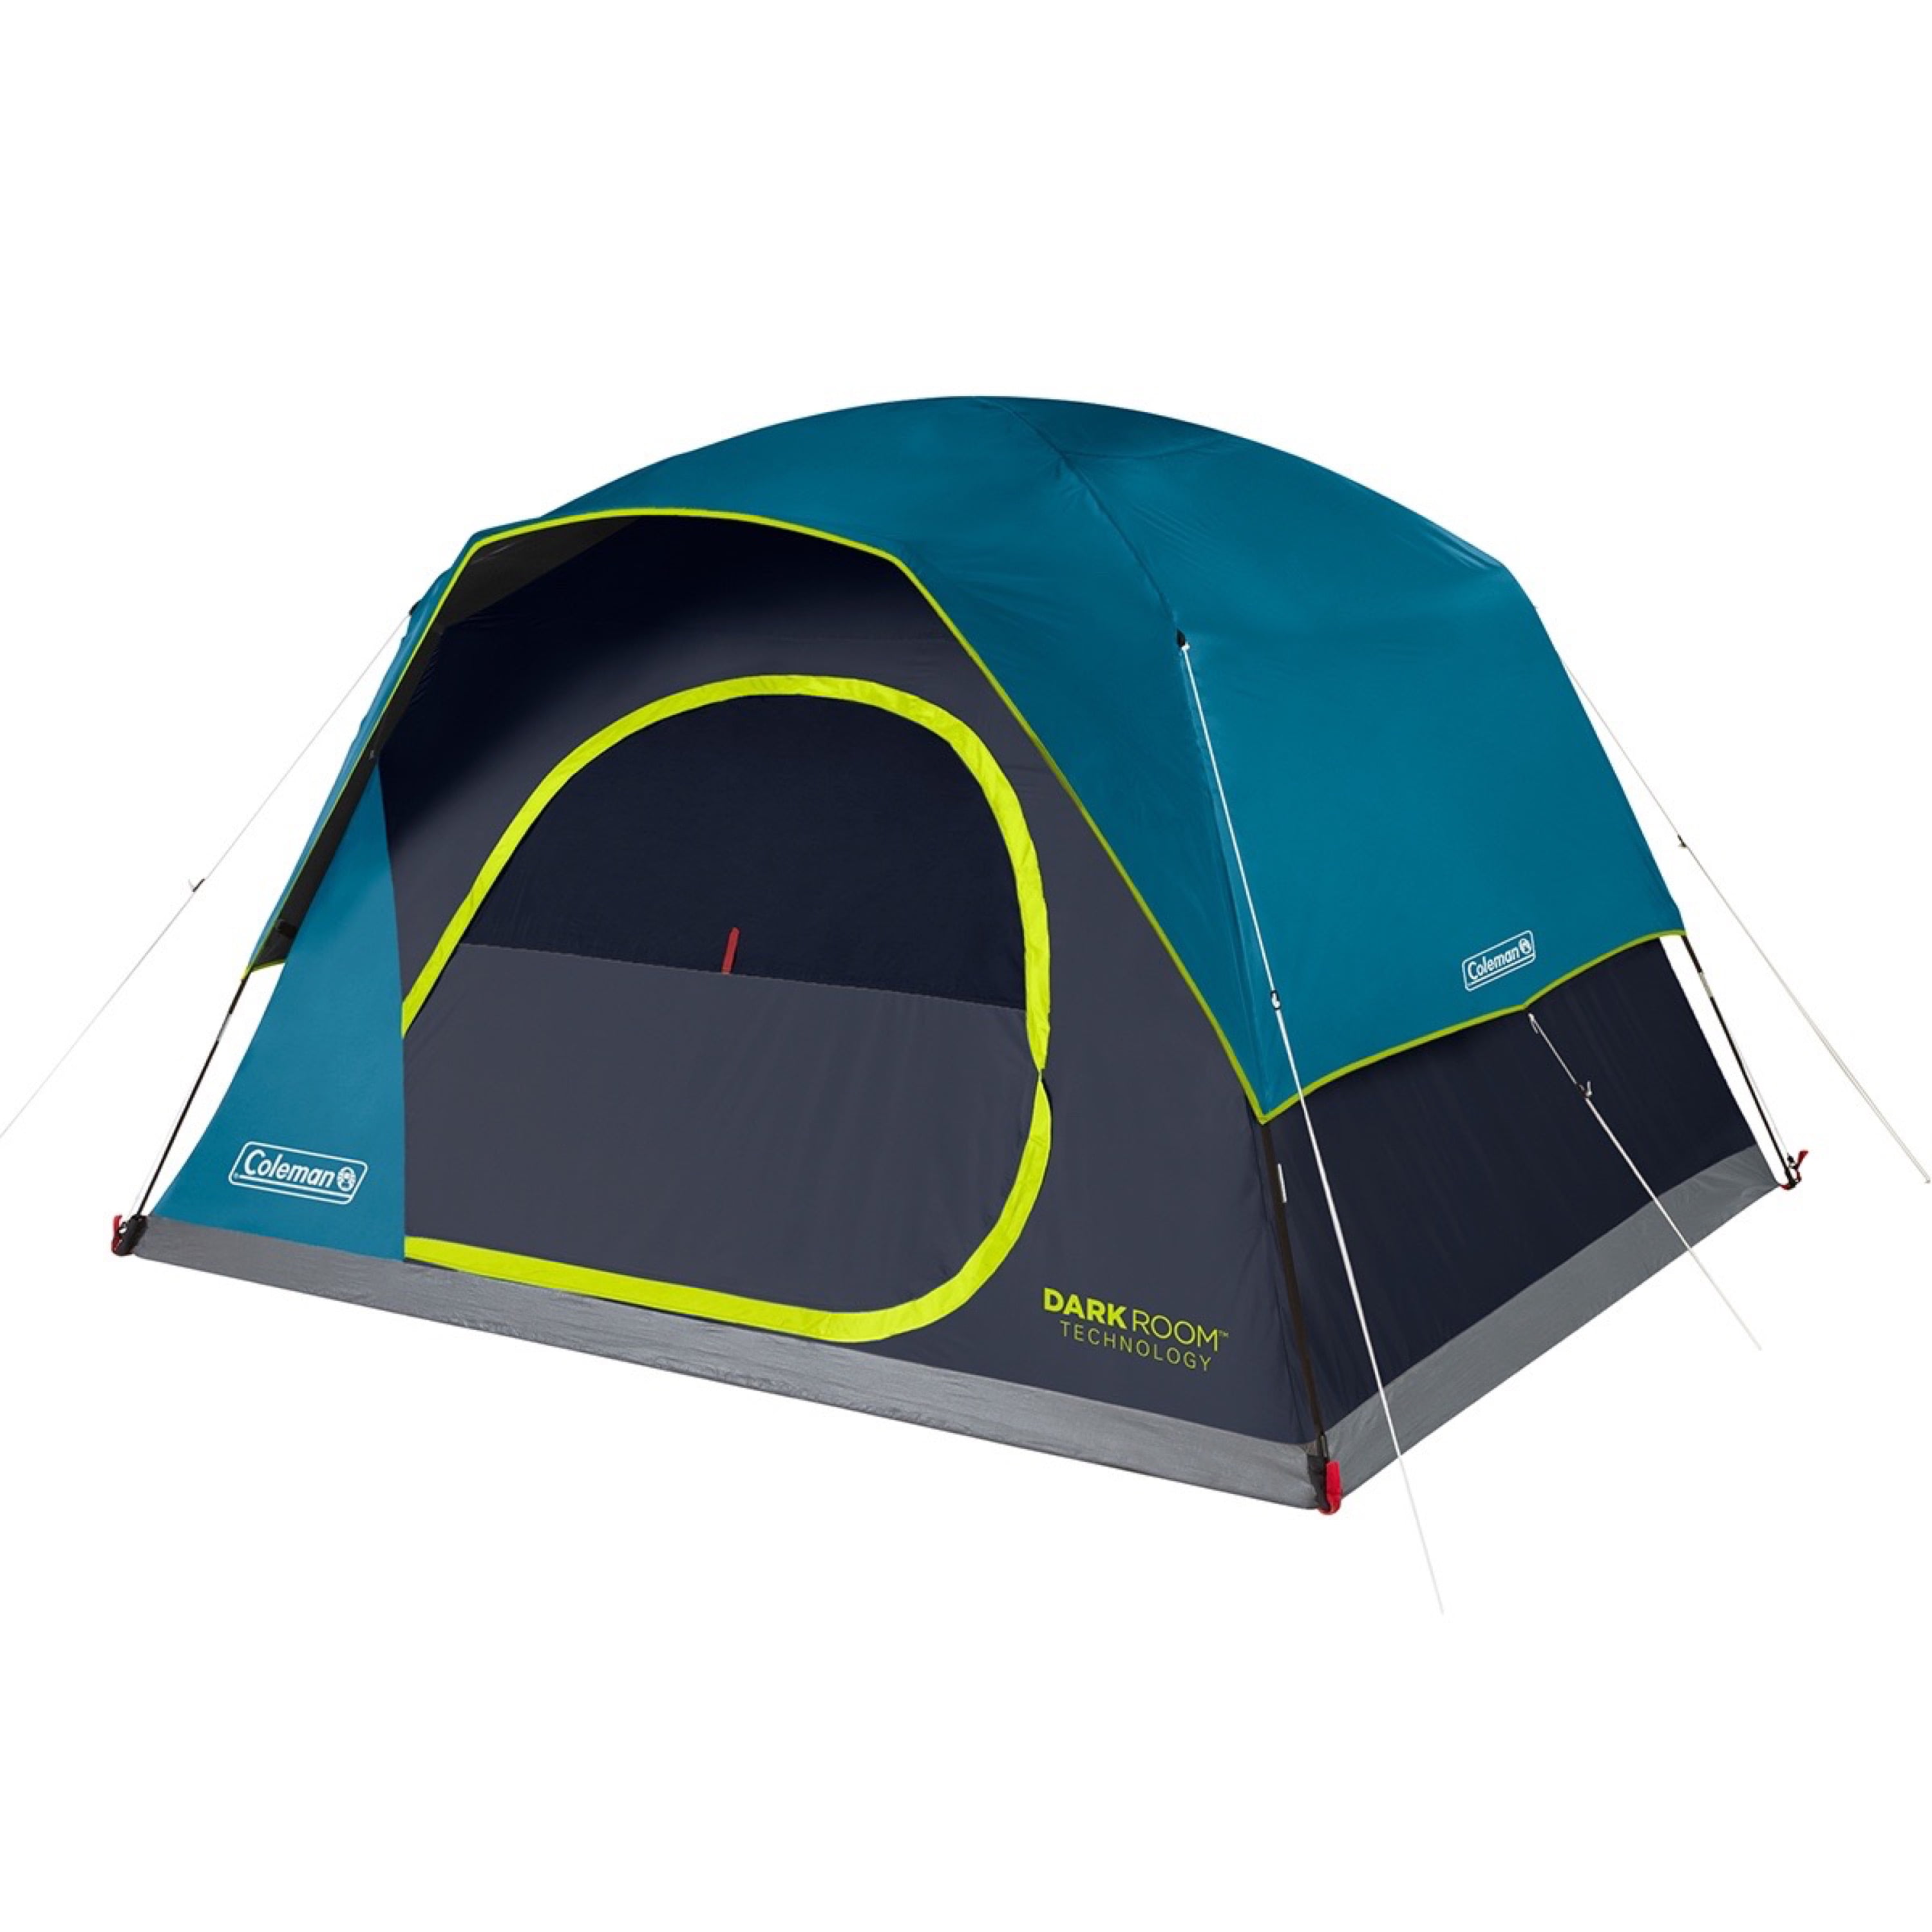 Coleman Camping Tent | Dark Room Skydome Tent, Blue, 6 Person 男女兼用 - 通販 ...